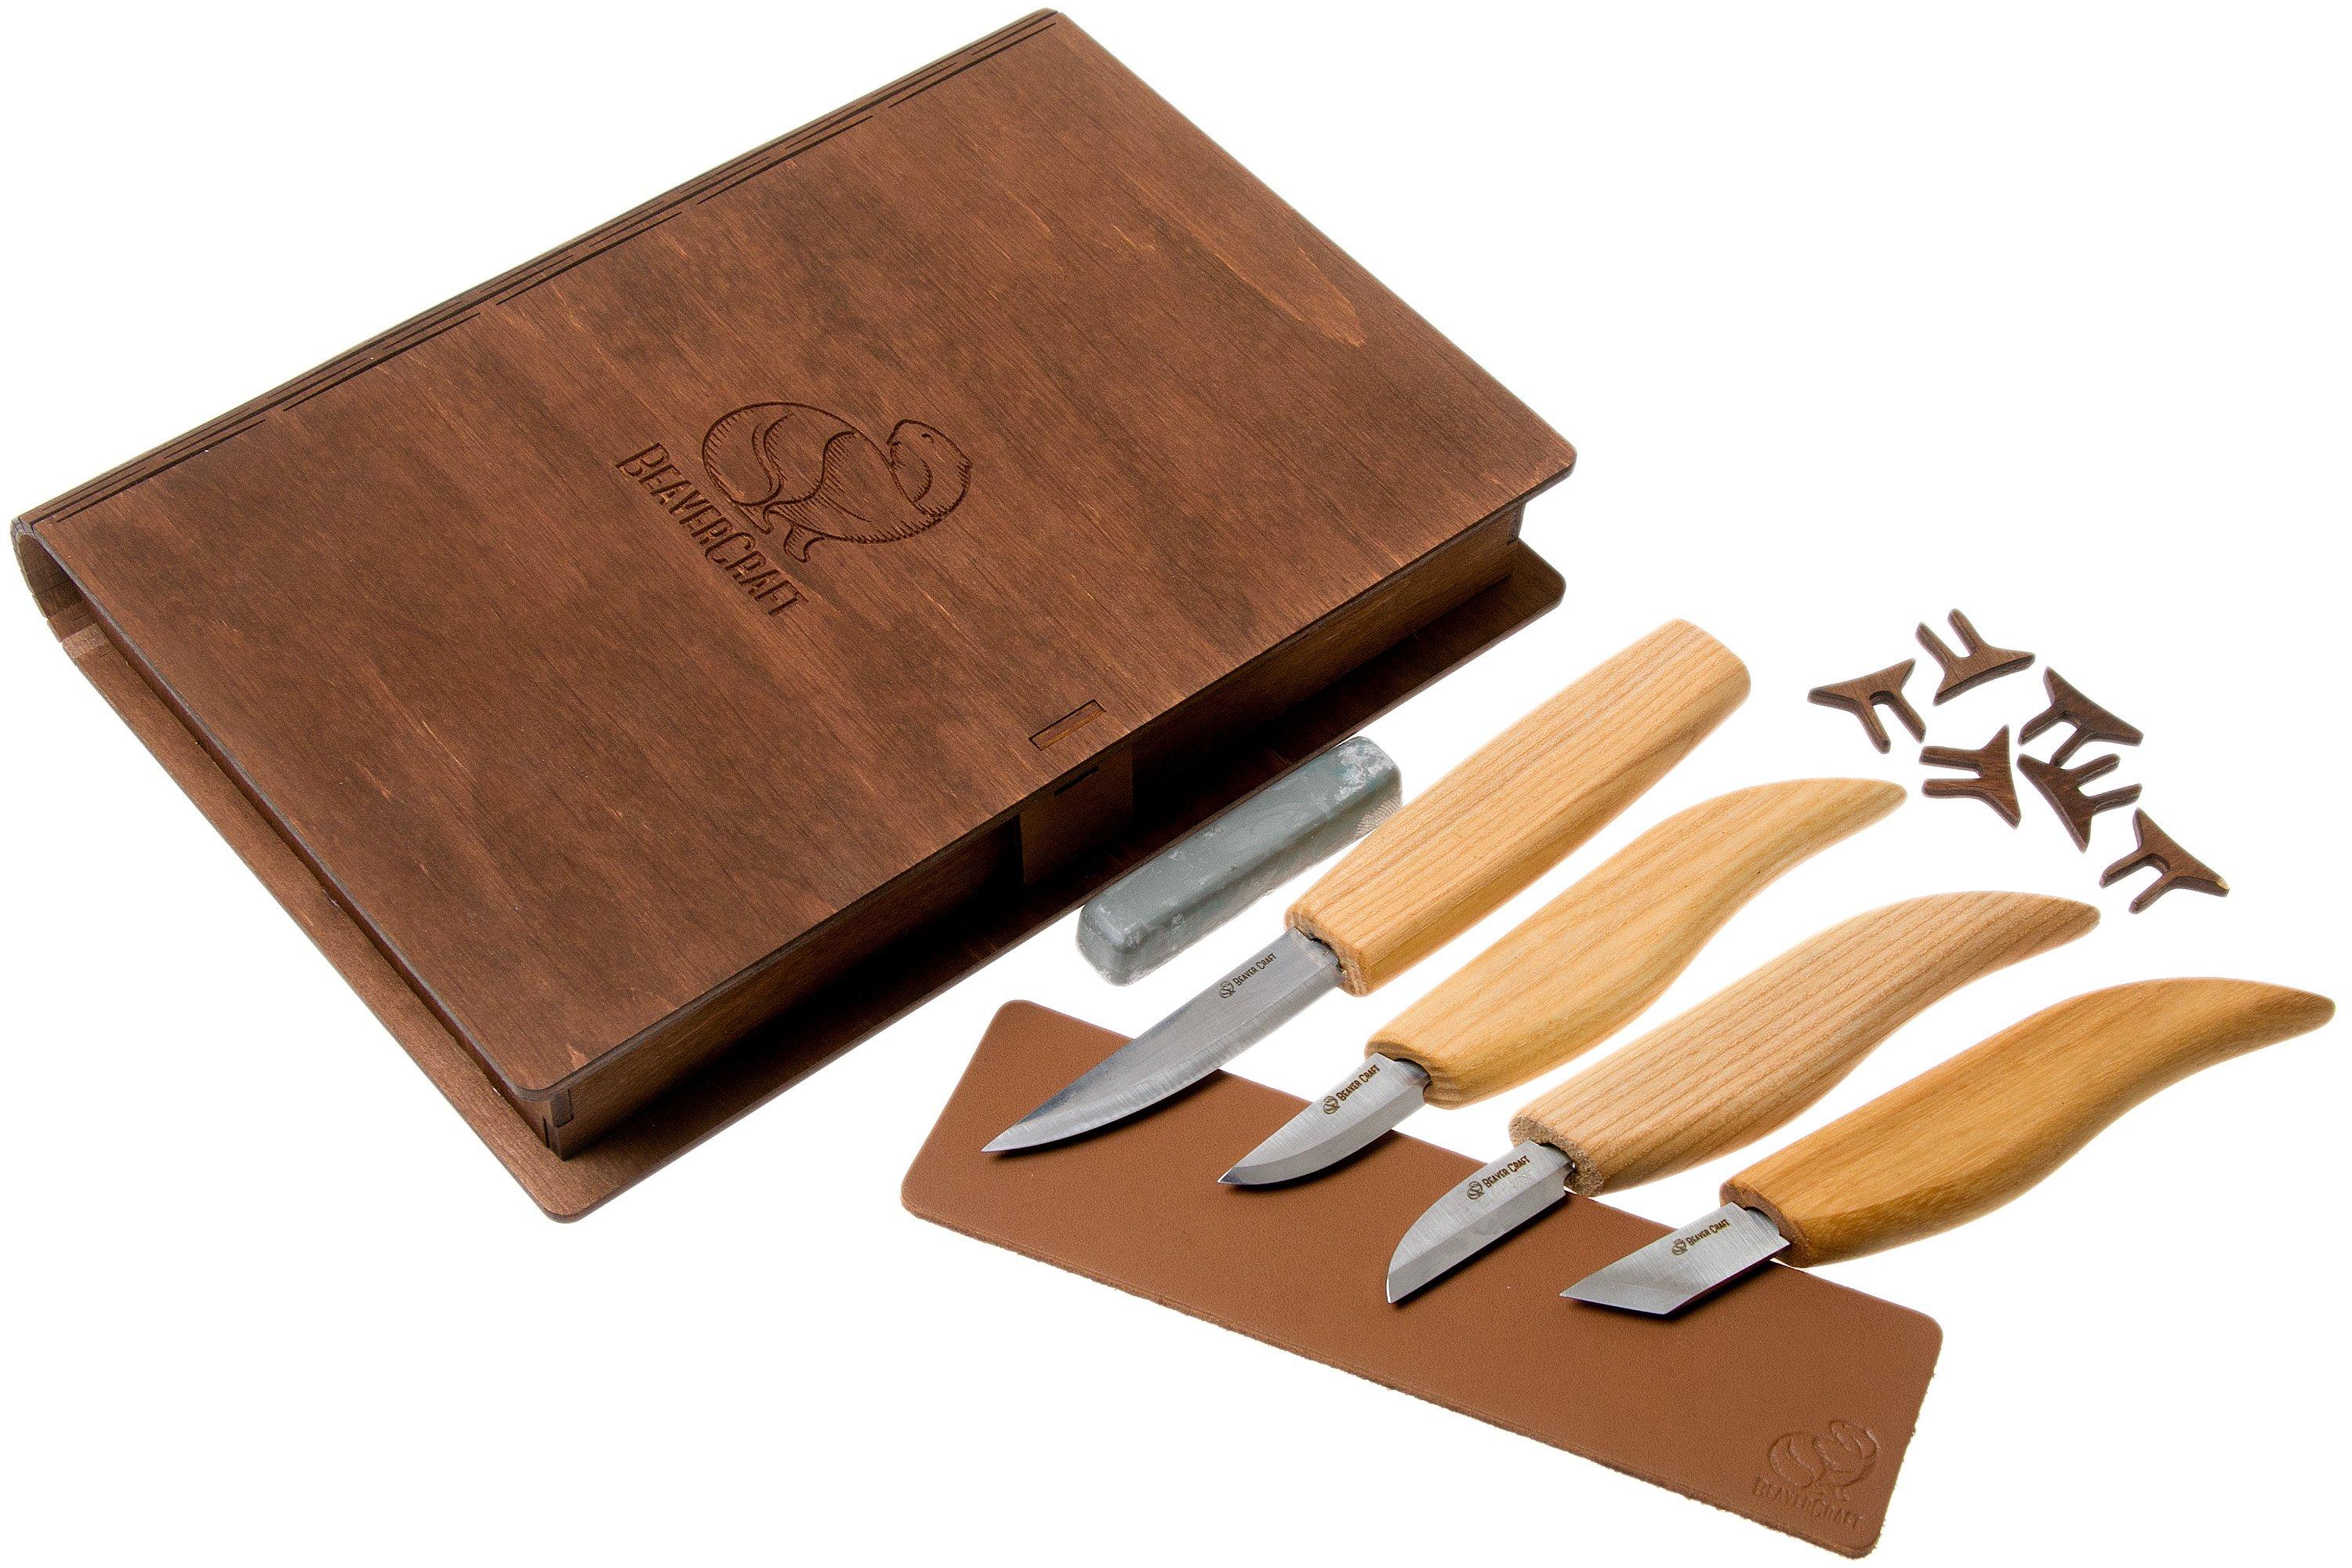 S07 Book - Basic Knives Set of 4 Knives in a Book Case